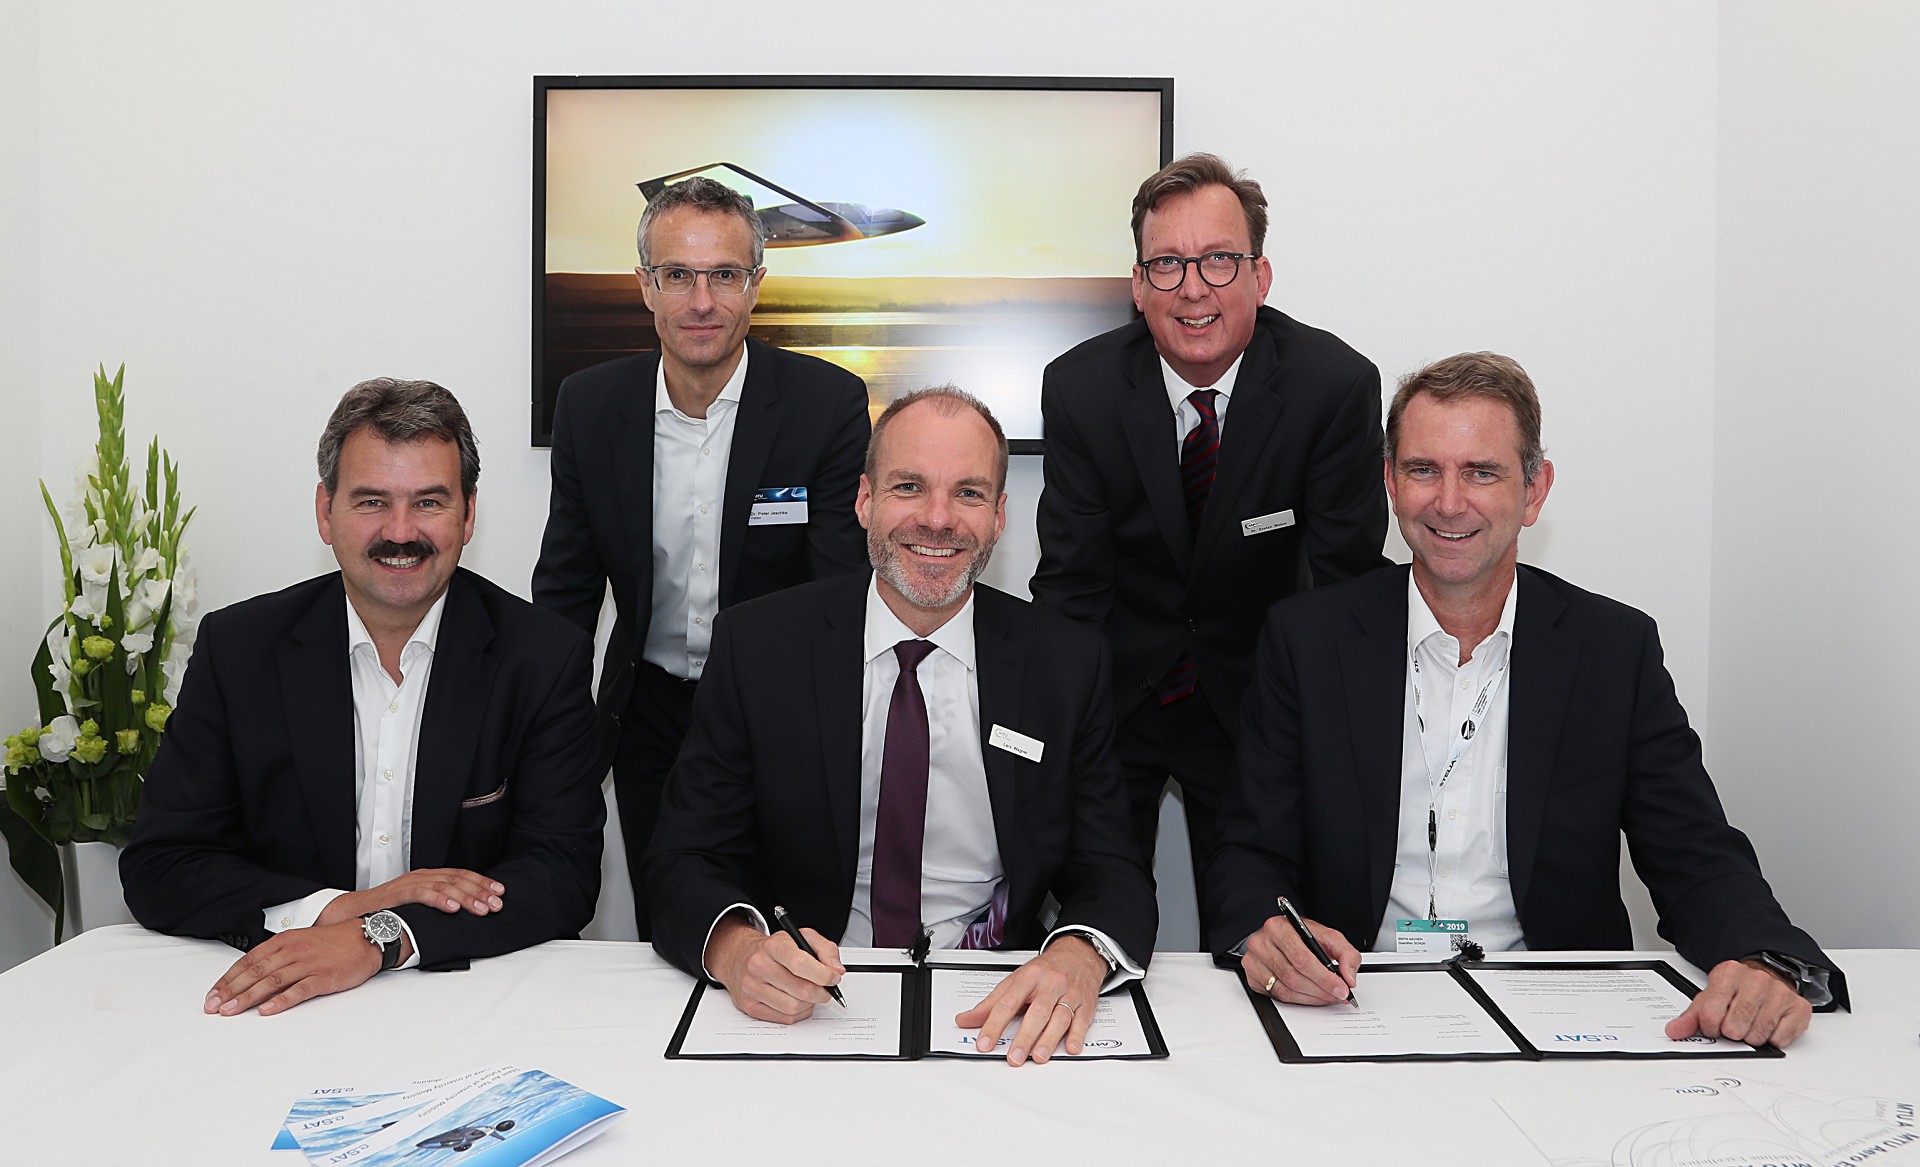 Caption: Signing of the LoI in the MTU chalet (from left to right): Prof. Dr. Frank Janser, Prof. Dr. Peter Jeschke, Lars Wagner, Dr. Stefan Weber and Prof. Dr. Günther Schuh.